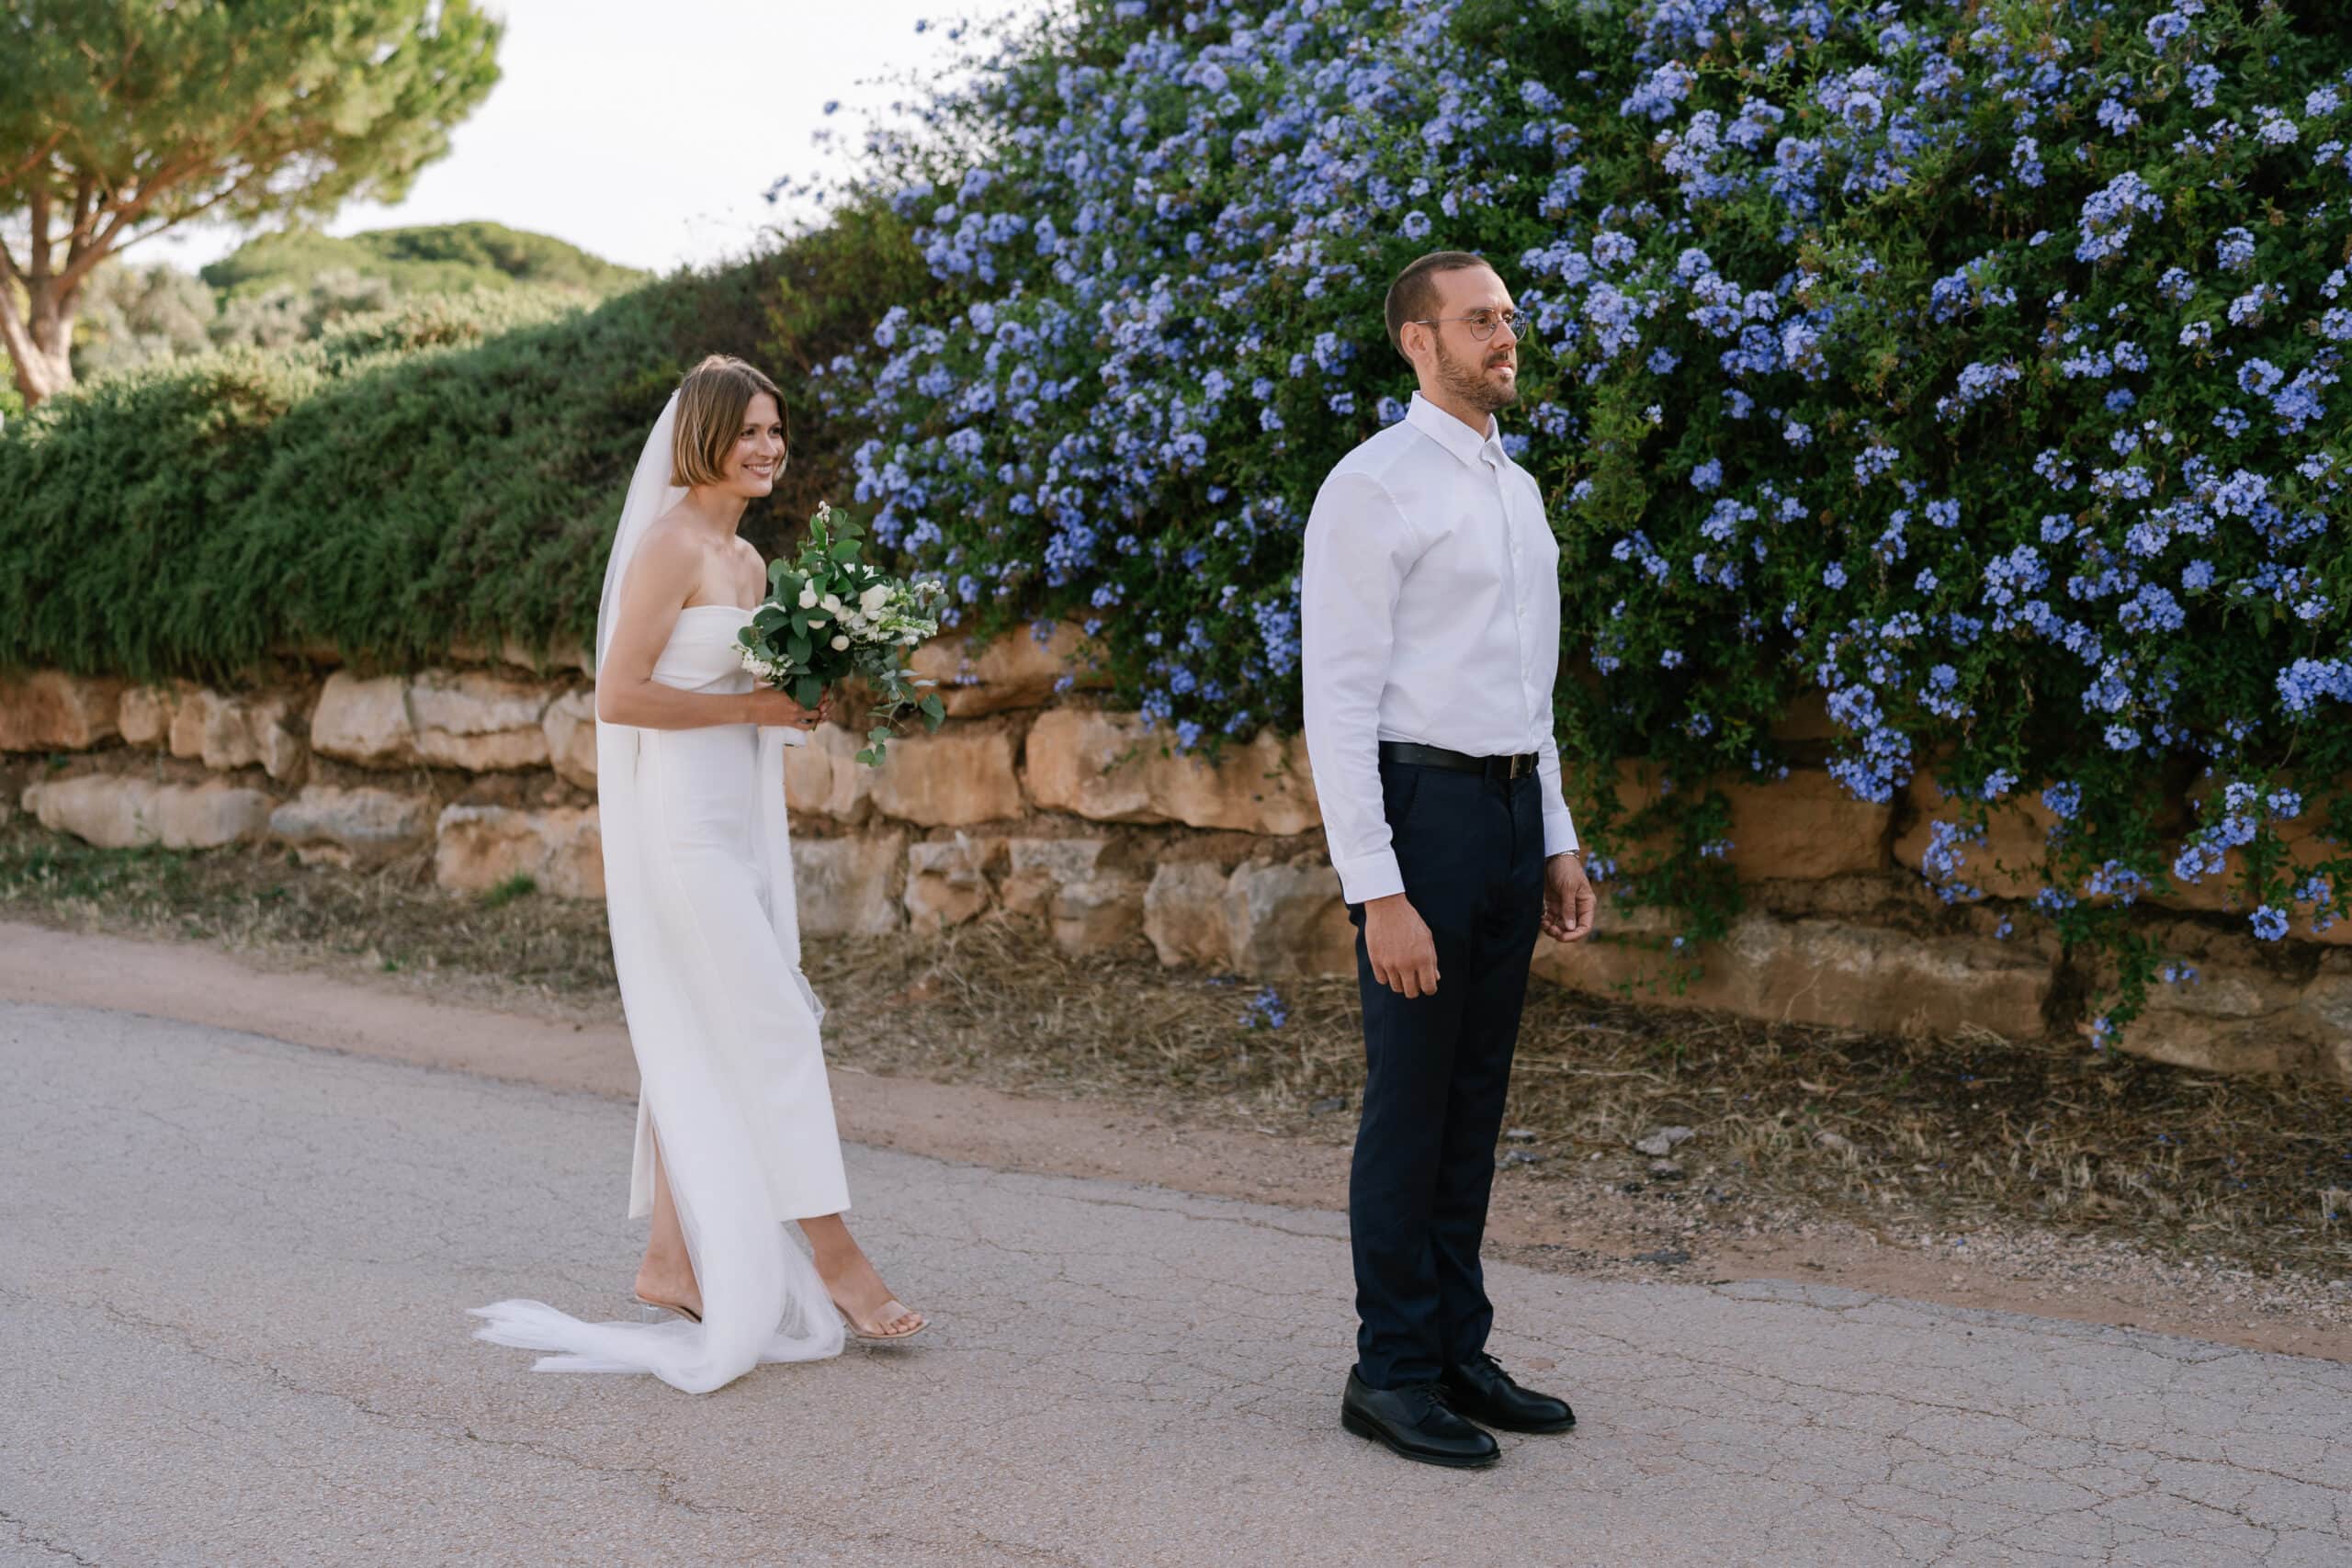 Bride approaching groom for a First Look at their Algarve elopement, with a backdrop of blooming blue flowers.